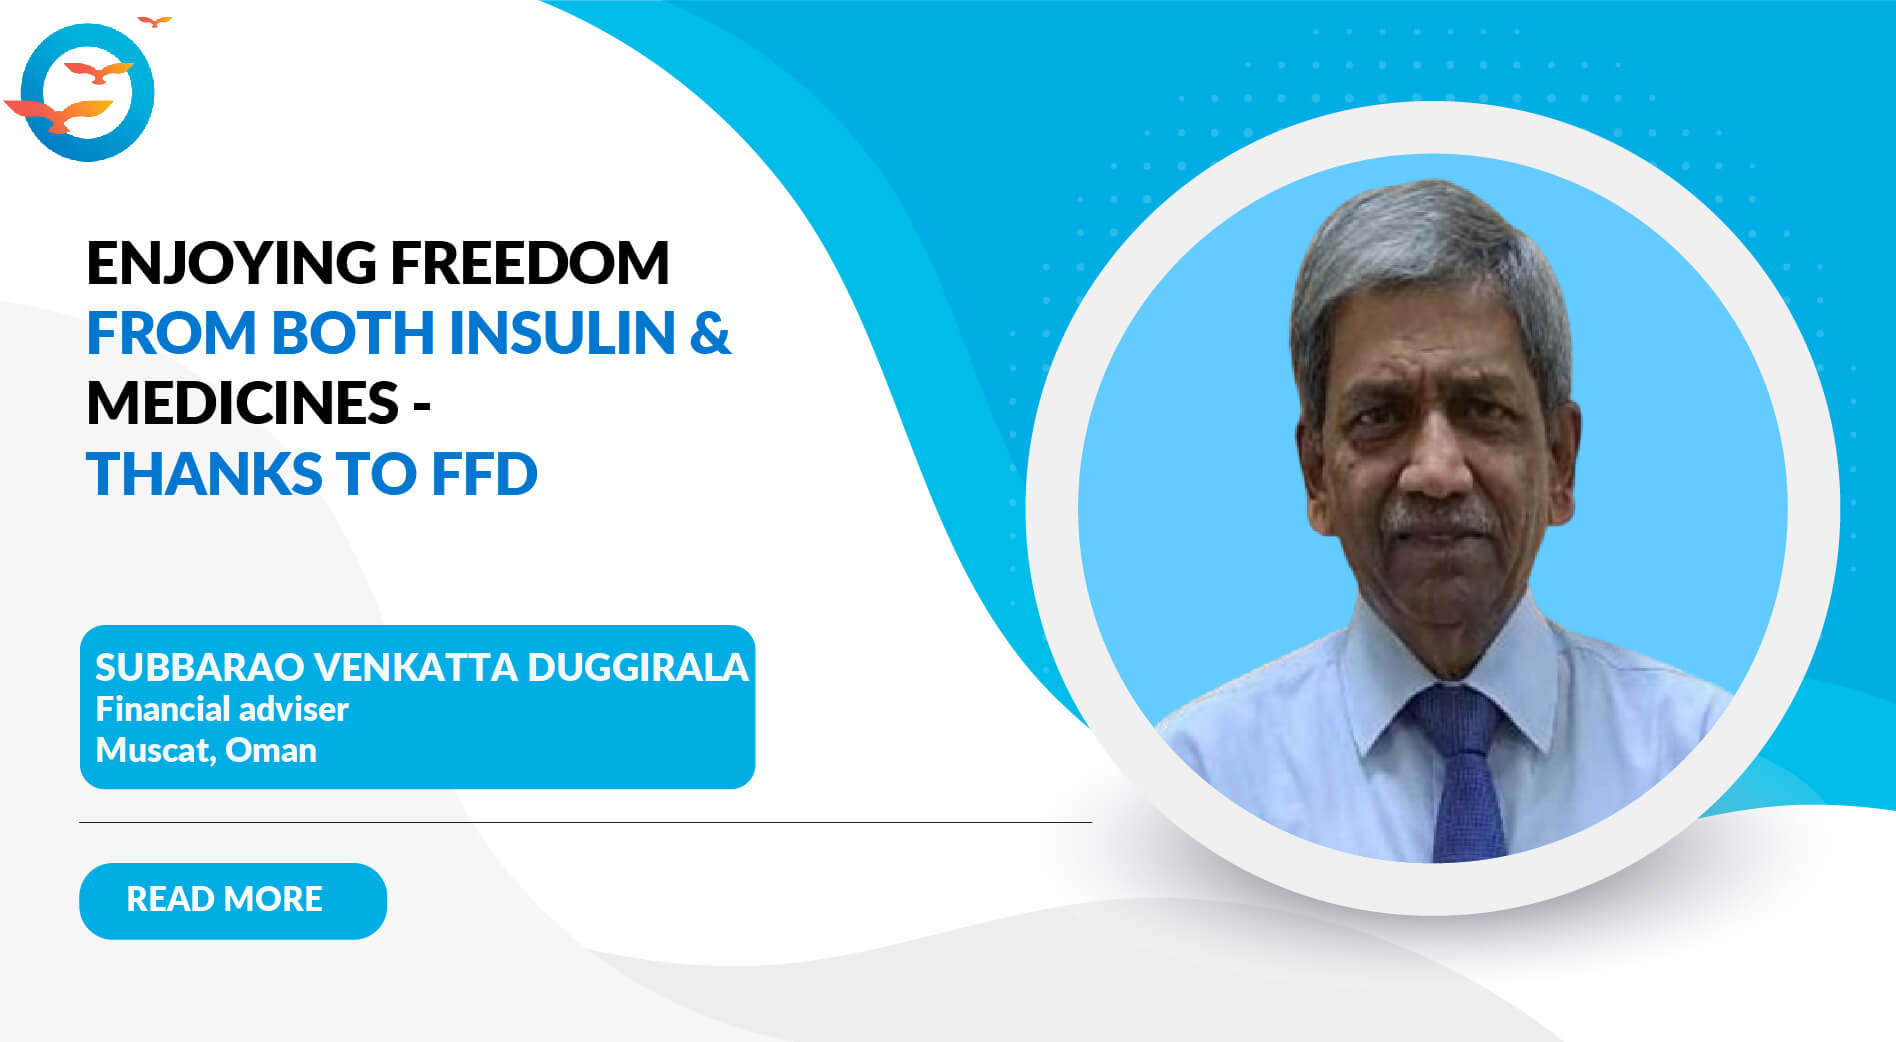 My Journey to Complete Freedom - No Insulin, No Medicines